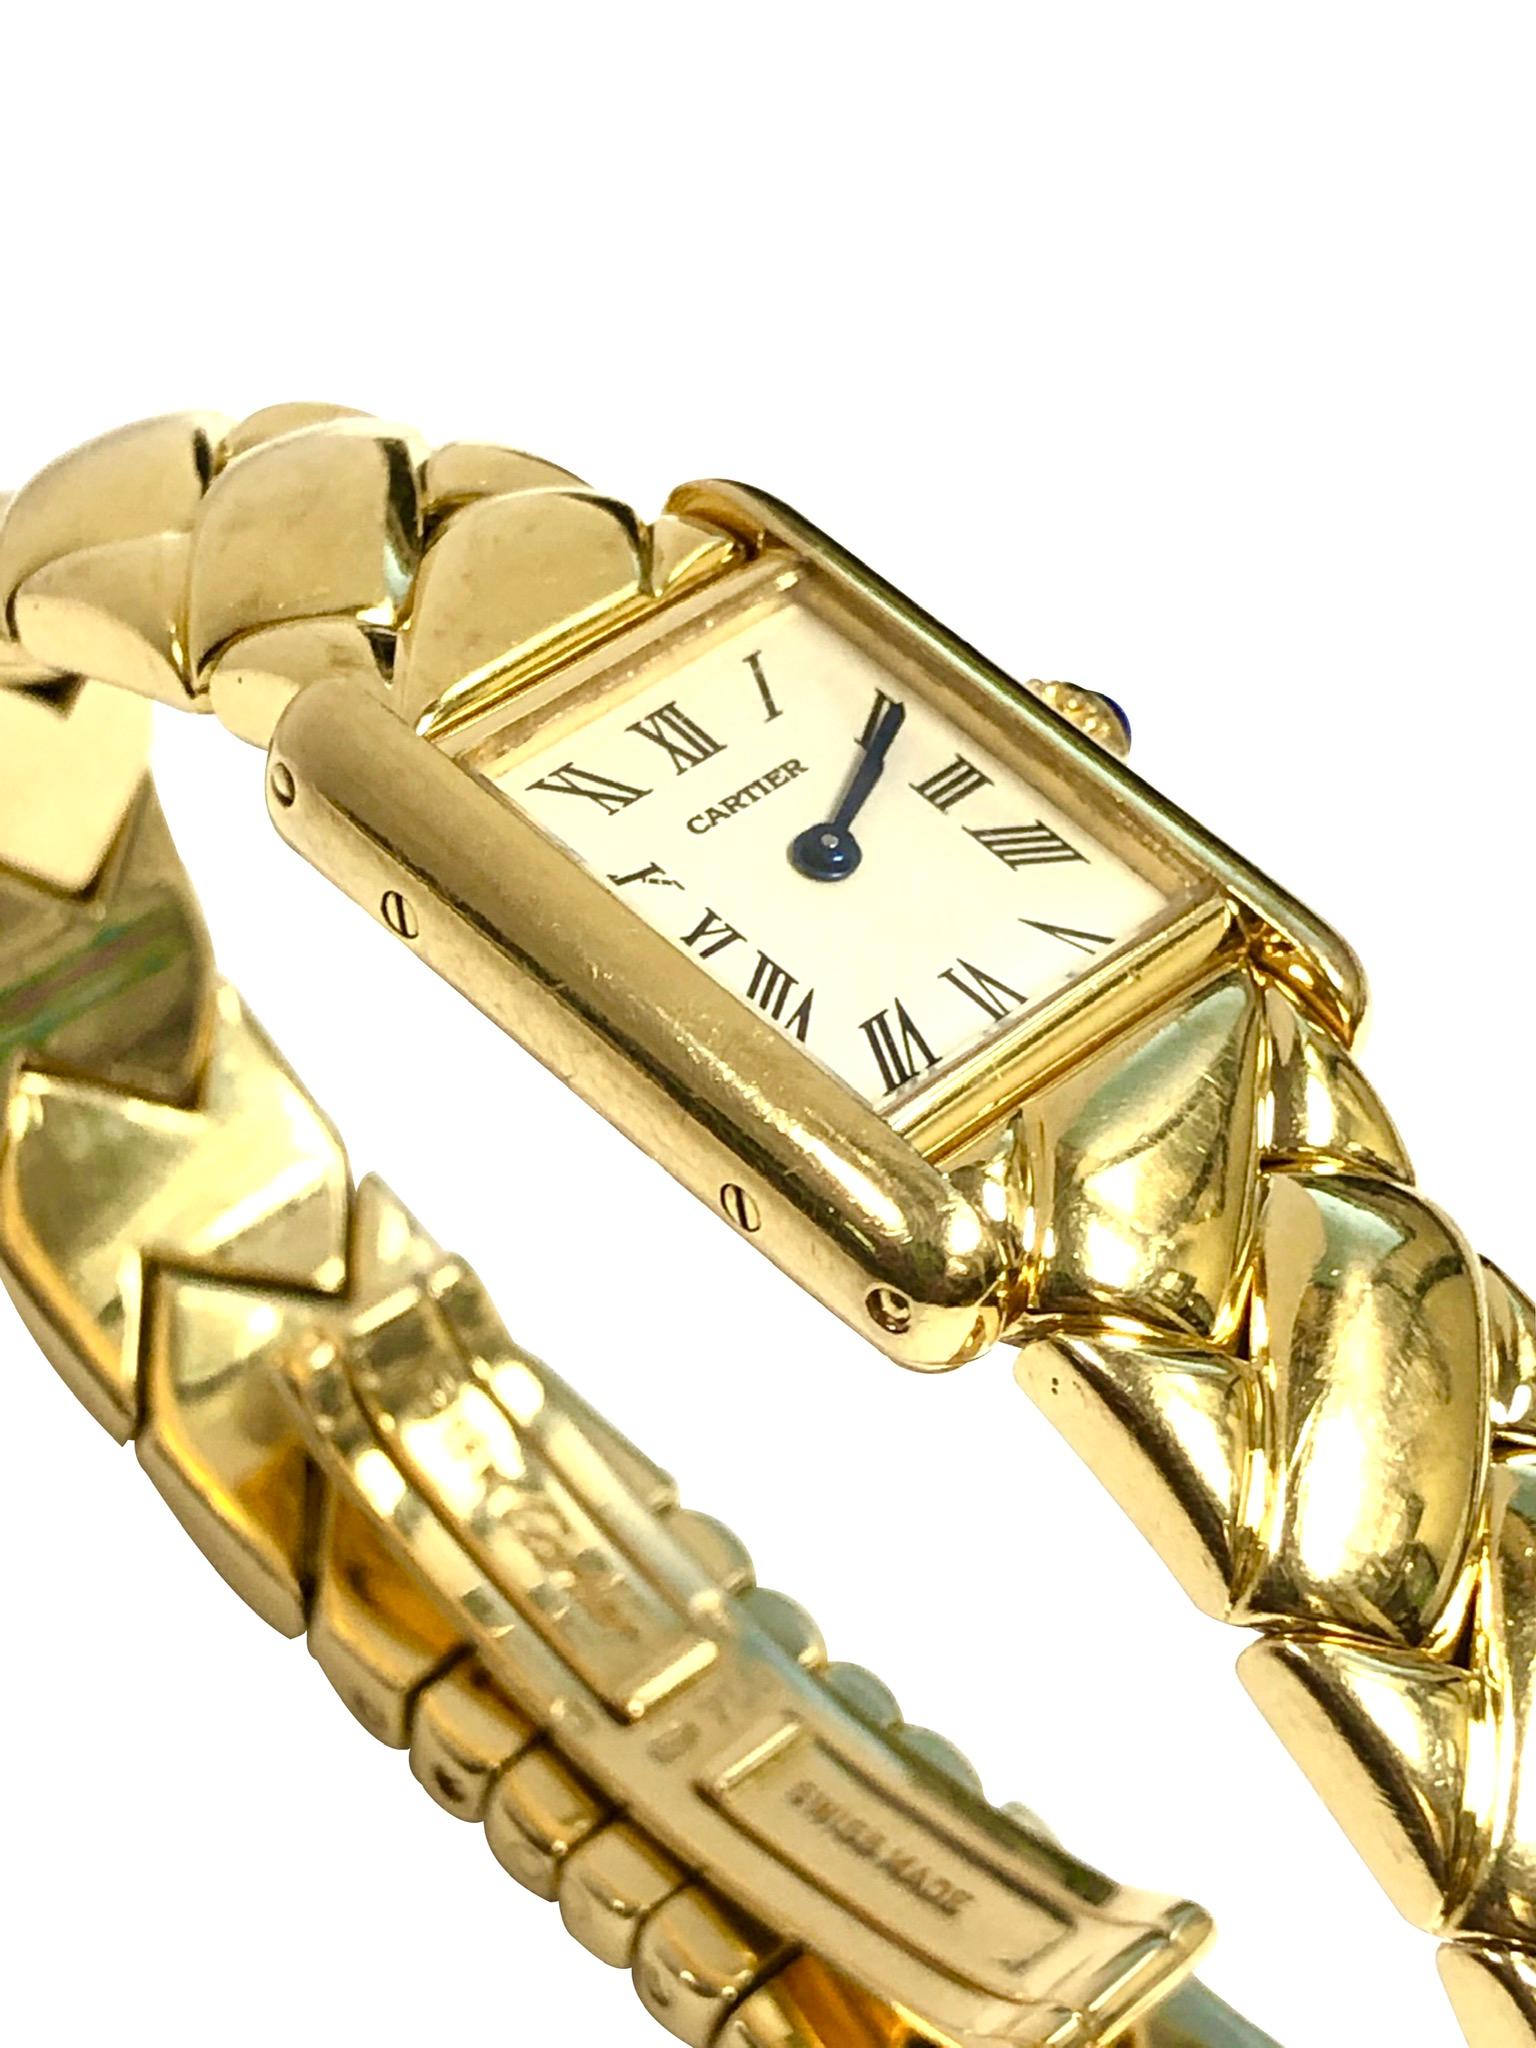 Circa 2000 Cartier Ladies Classic Tank Wrist Watch on limited edition Bracelet, 25 X 18 M.M. 18K Yellow Gold 2 Piece case, Quartz movement, White Dial with Black Roman Numerals, Sapphire Crown. 1/2 inch wide 18 K Yellow Gold LaDonna style link